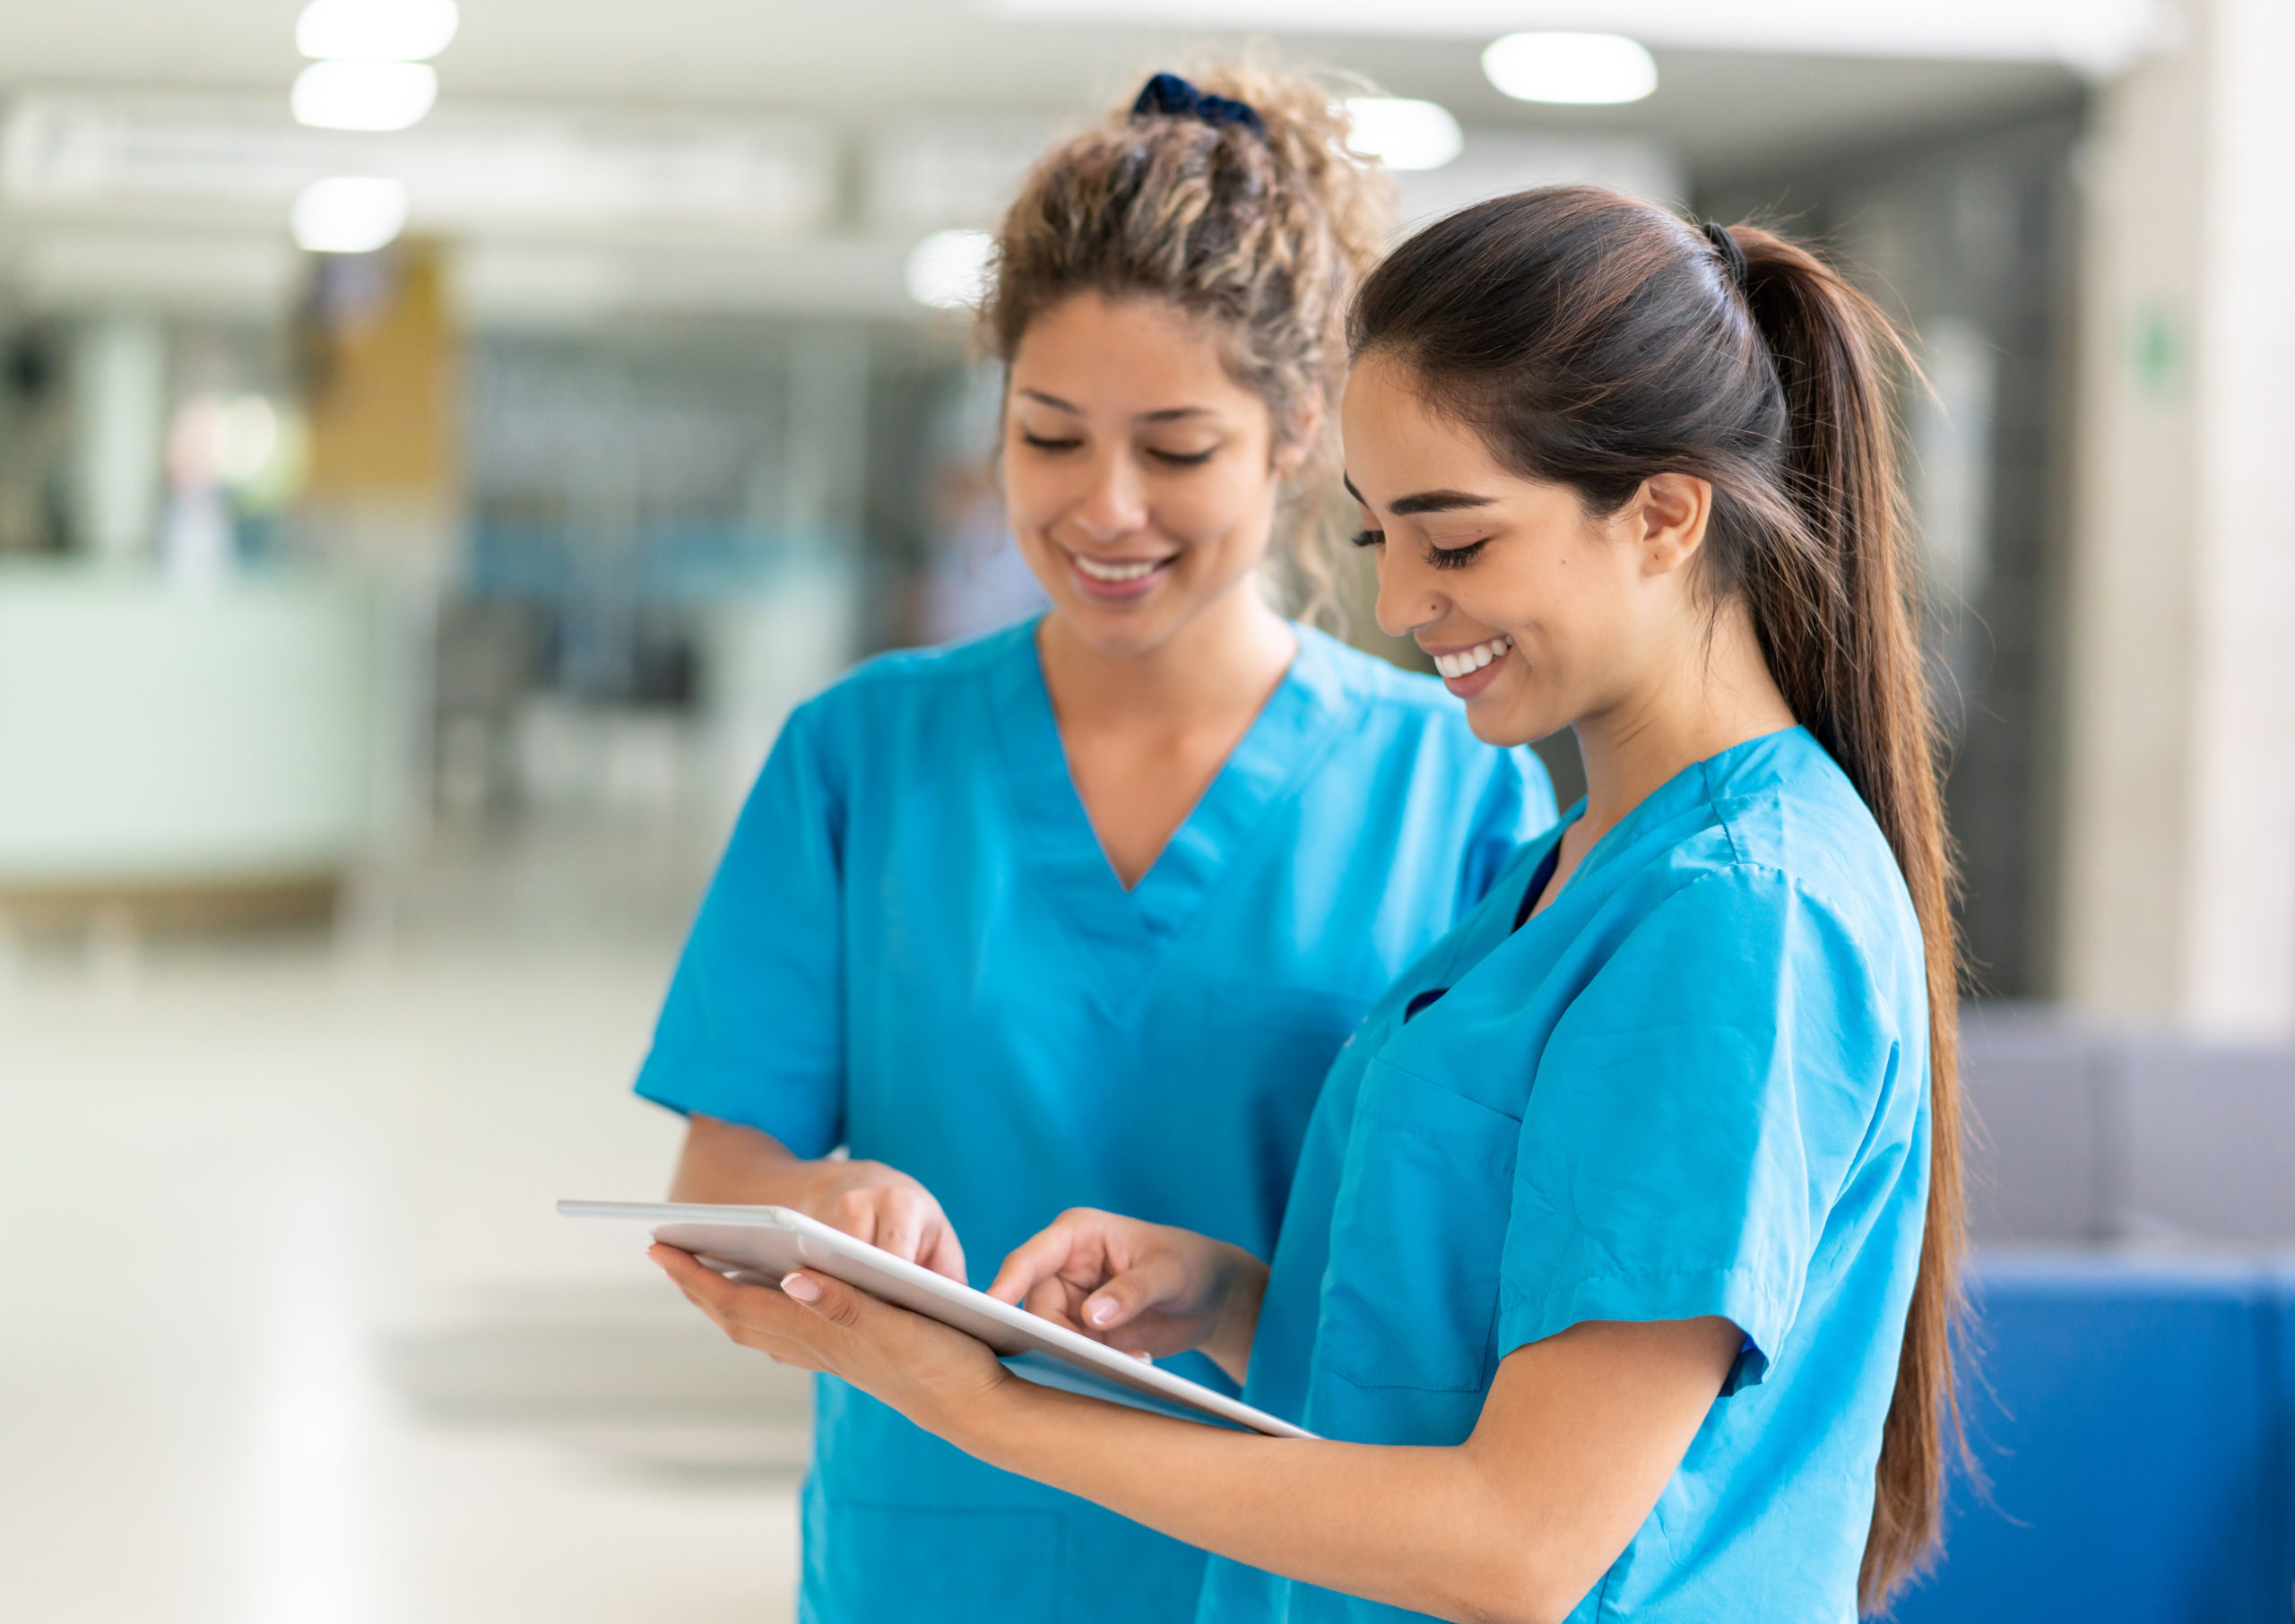 Improving the nursing experience with interoperable data management